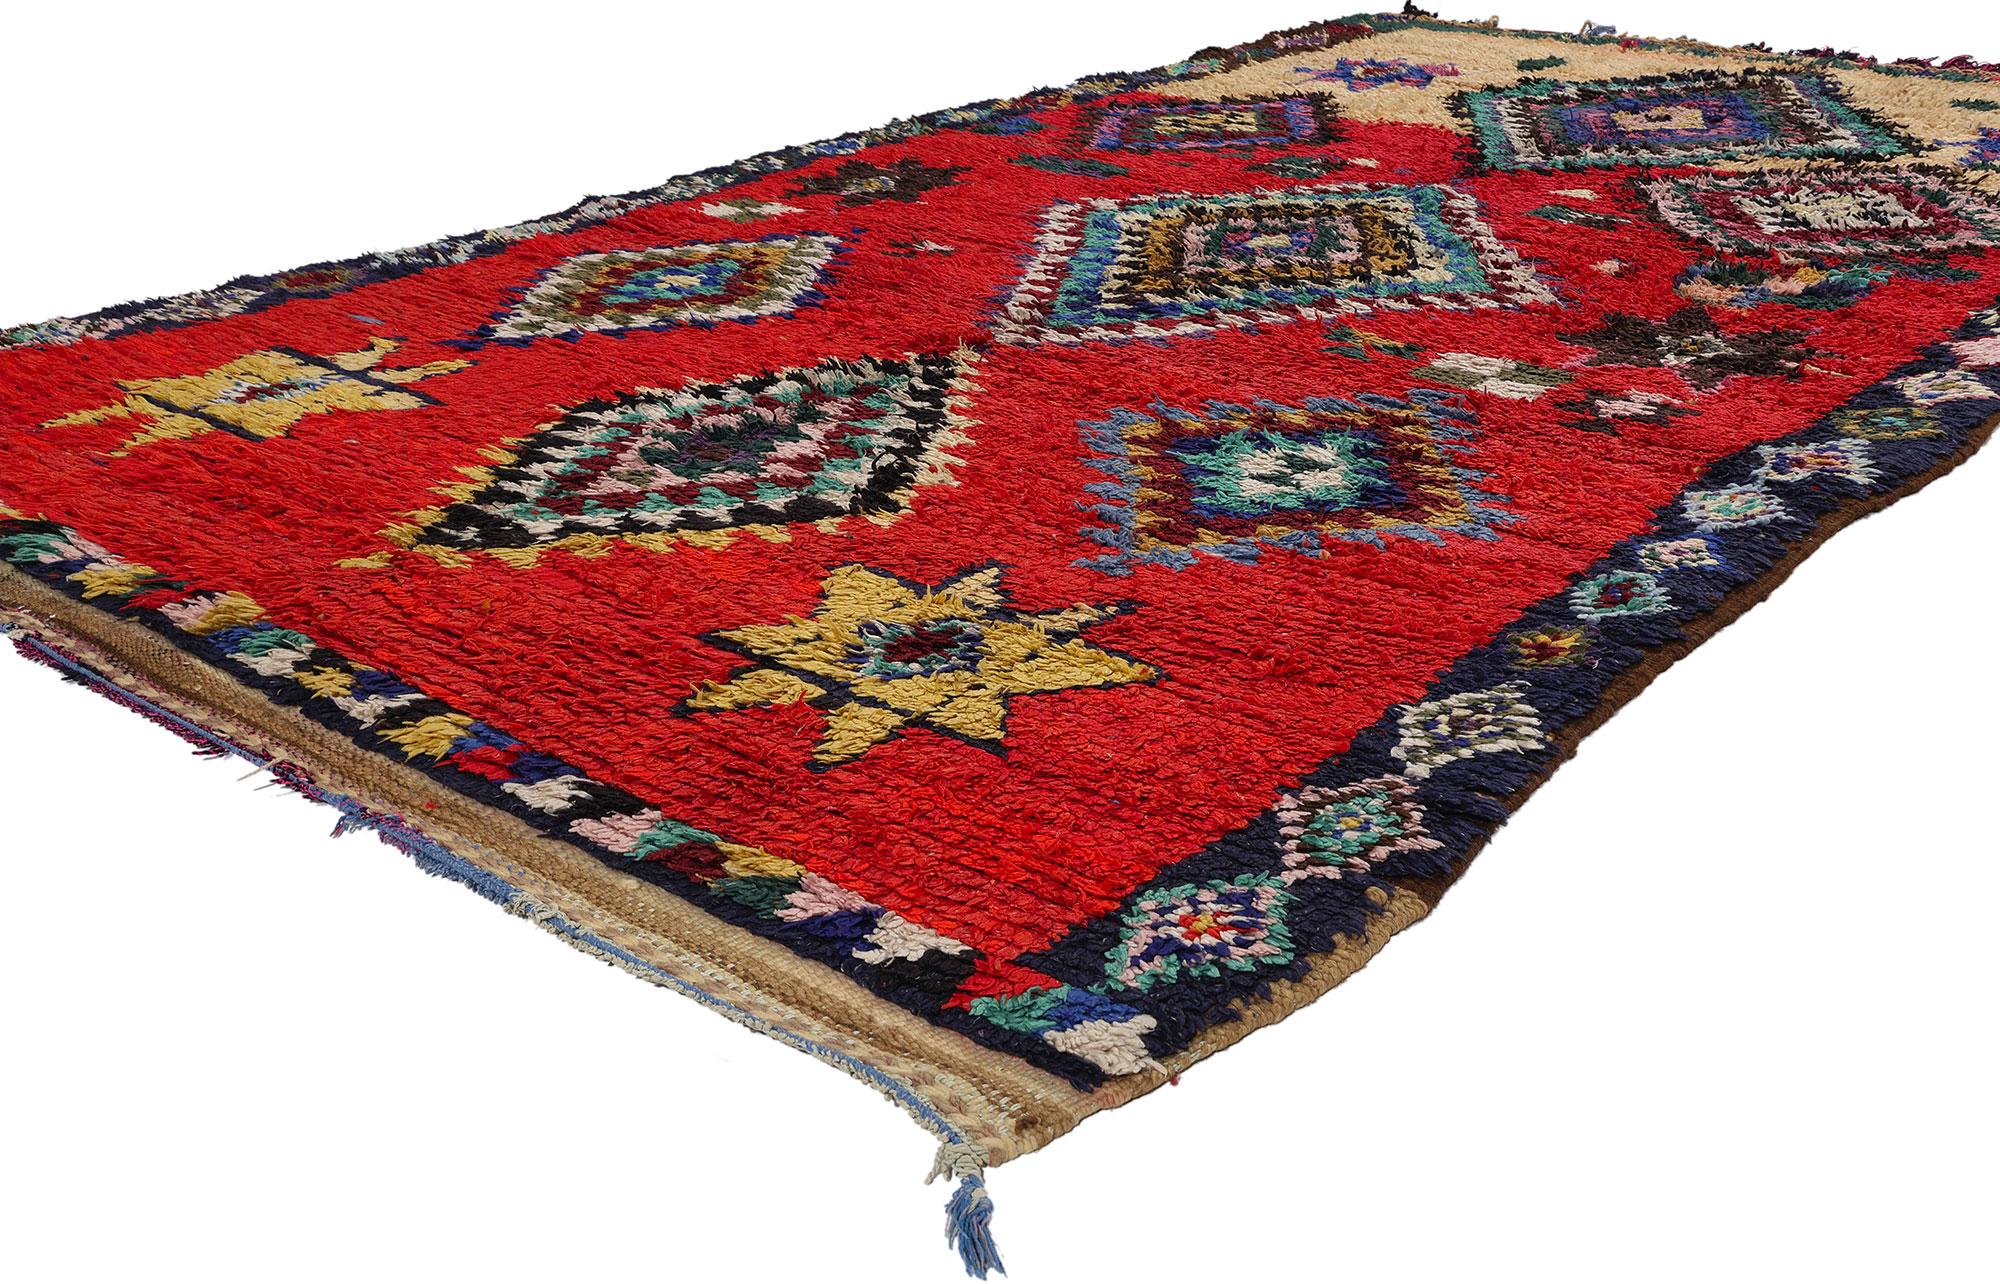 21795 Vintage Red Boujad Moroccan Rug, 05'01 x 09'05. Boujad rugs, hailing from the Boujad region nestled in the Middle Atlas Mountains of Morocco, are handwoven treasures steeped in tradition. Crafted by skilled Berber tribes, notably the Haouz and